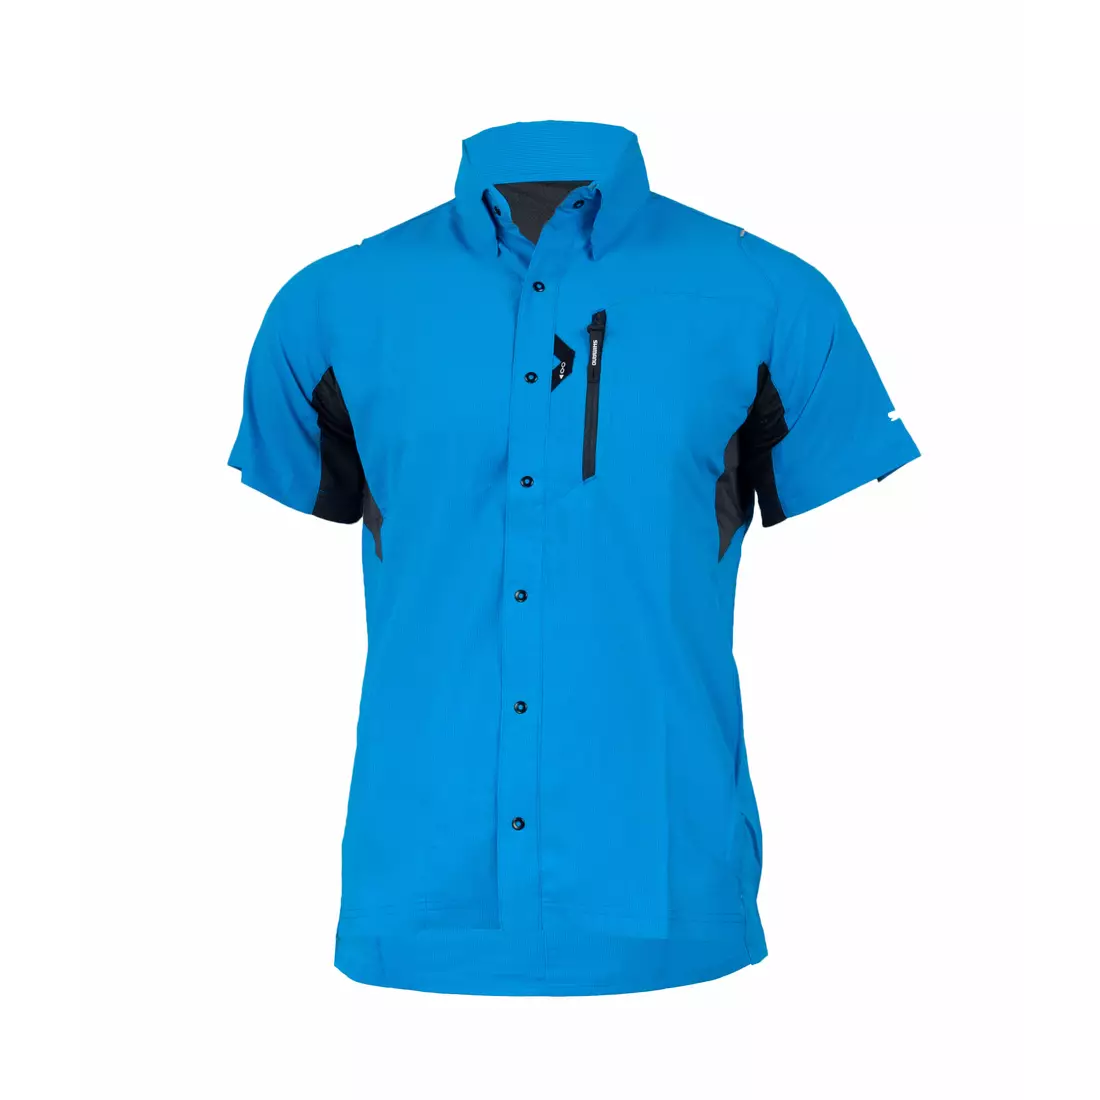 SHIMANO BUTTON UP SHIRT Men's Loose Cycling Jersey, Blue CWJSTSMS11MH